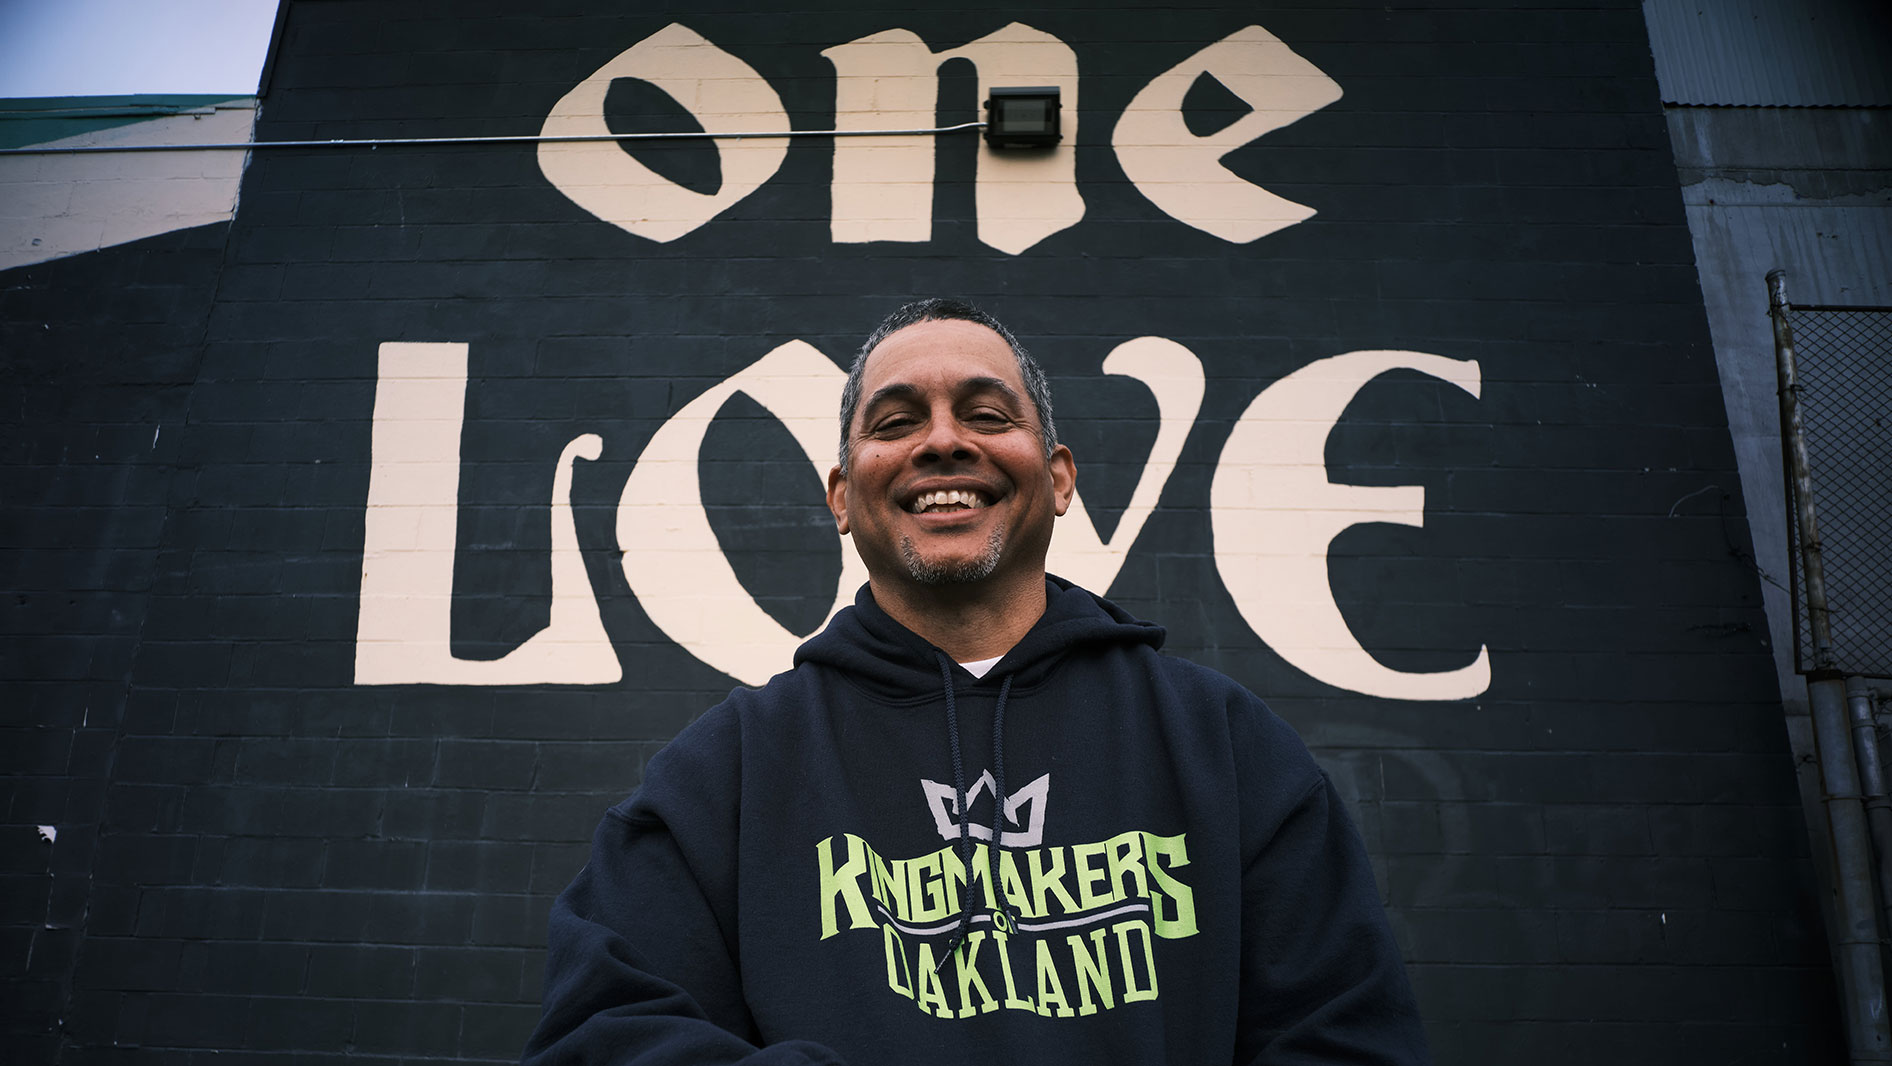 Chris Chatmon, Chief Executive Officer, Kingmakers of Oakland